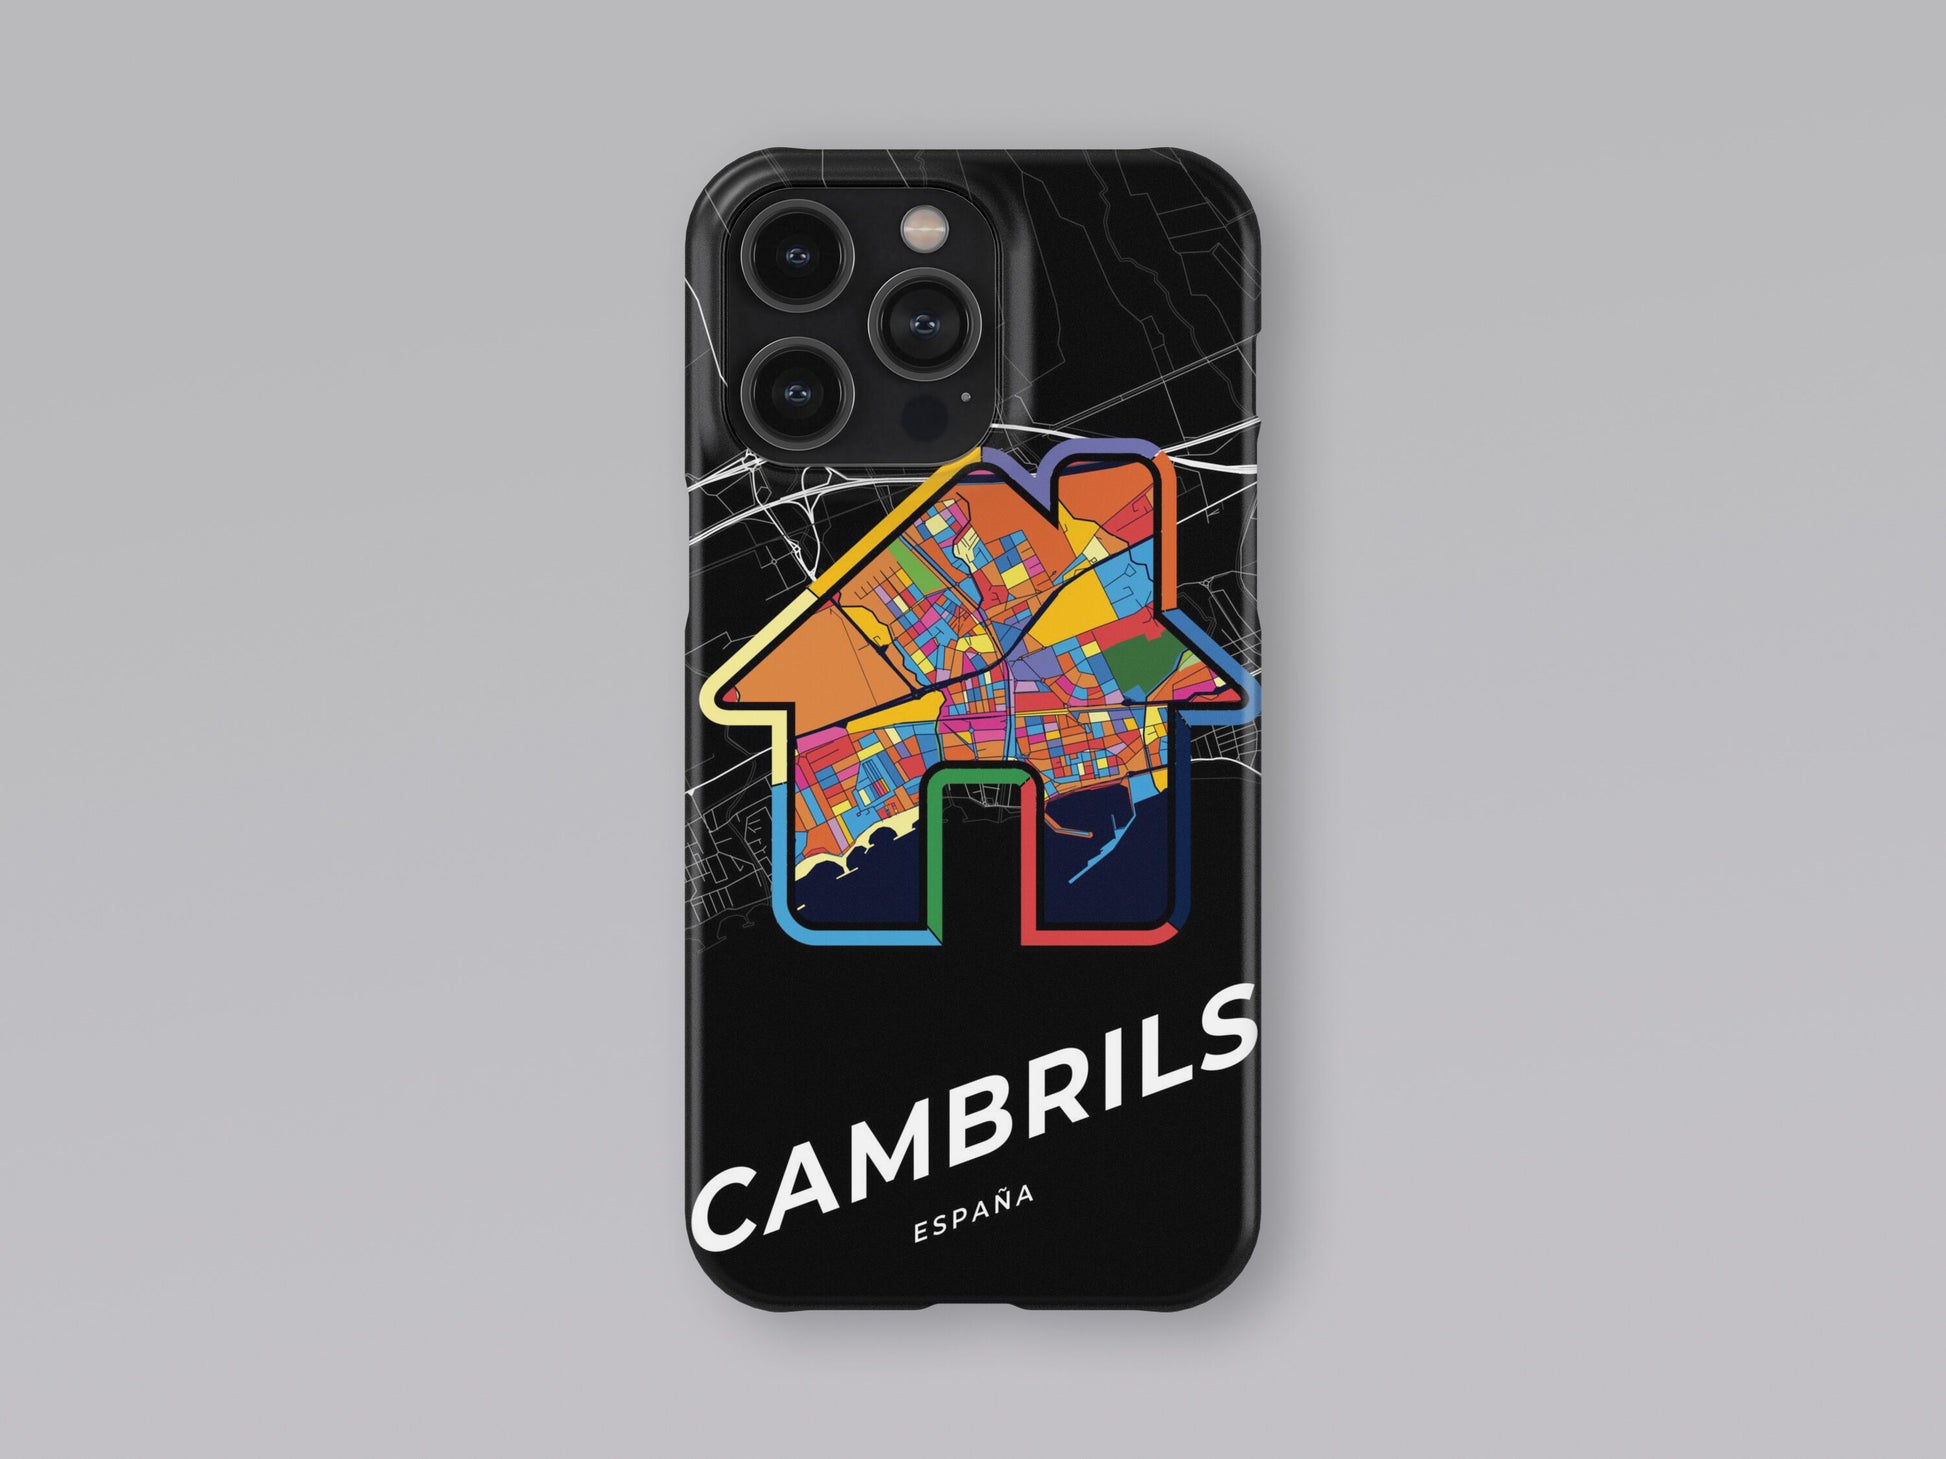 Cambrils Spain slim phone case with colorful icon. Birthday, wedding or housewarming gift. Couple match cases. 3